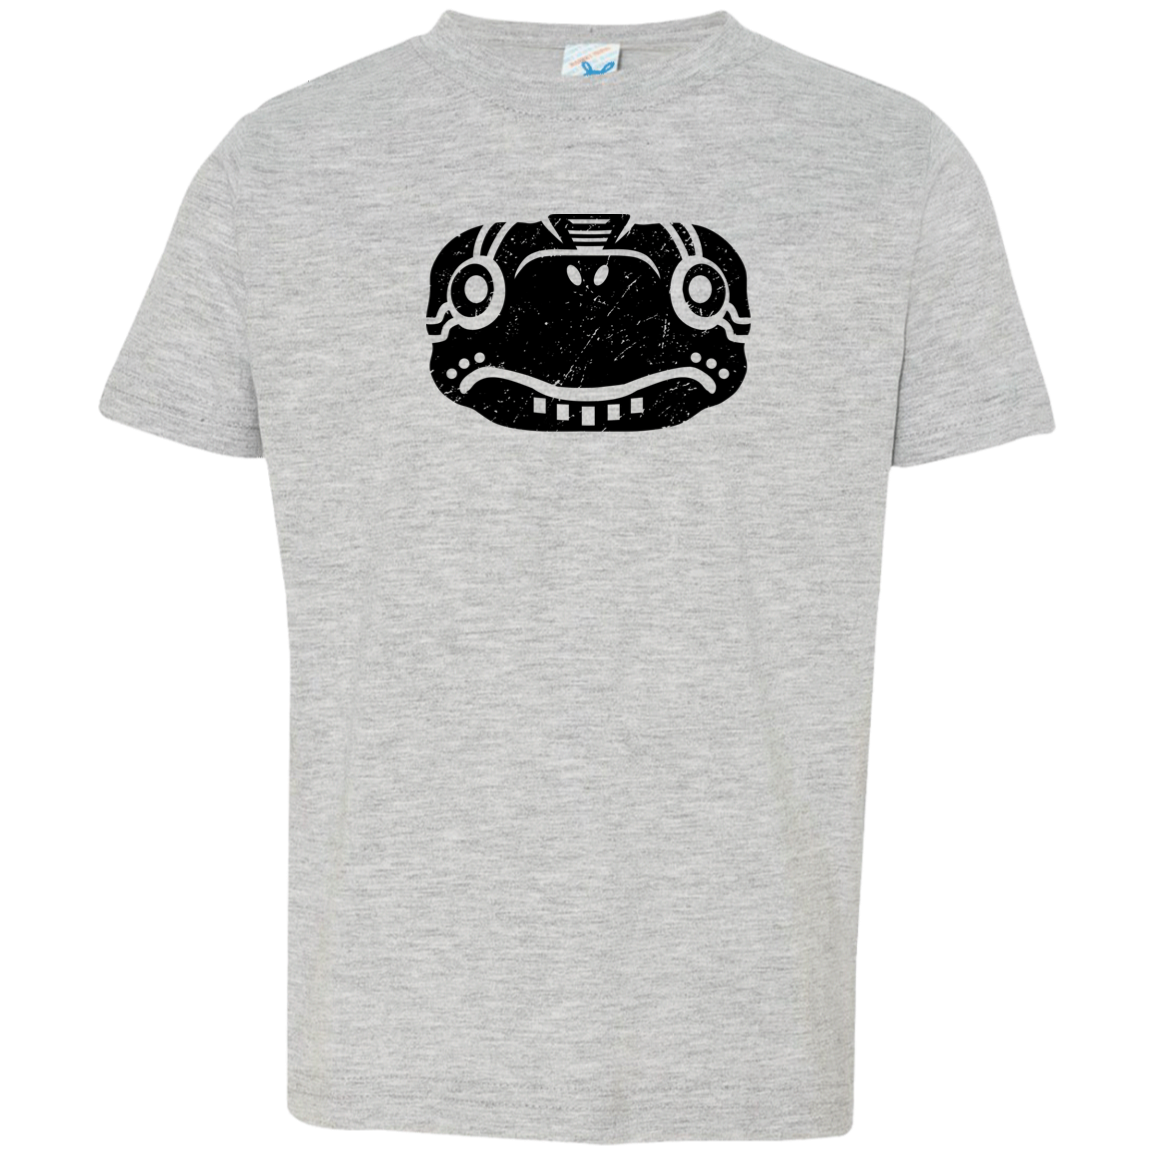 Black Distressed Emblem T-Shirts for Toddlers (Turtle/Pearl) - Dark Corps